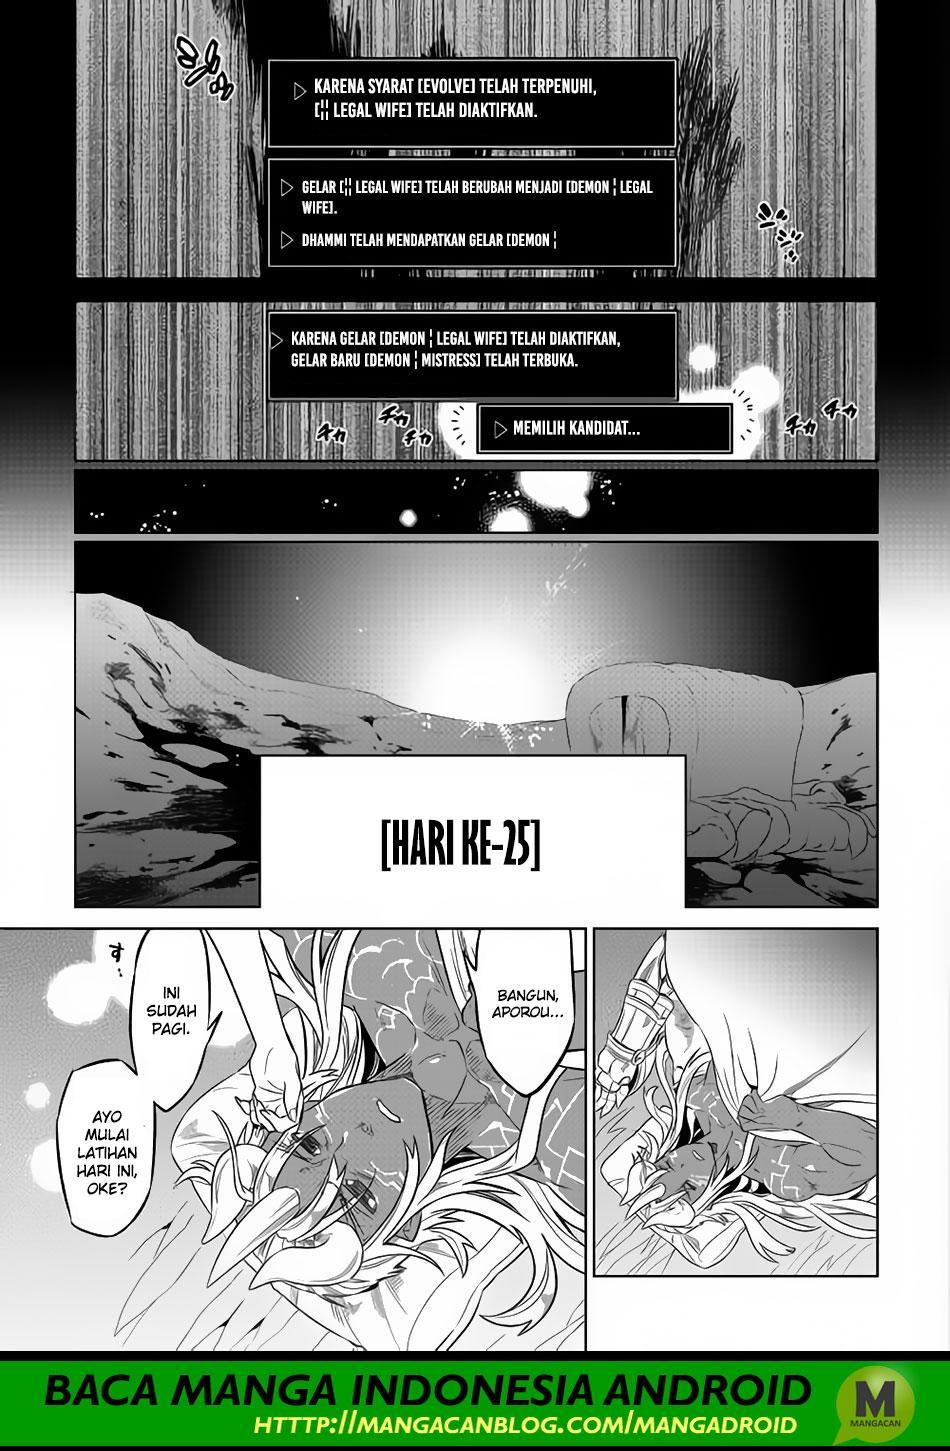 Re:Monster Chapter 50